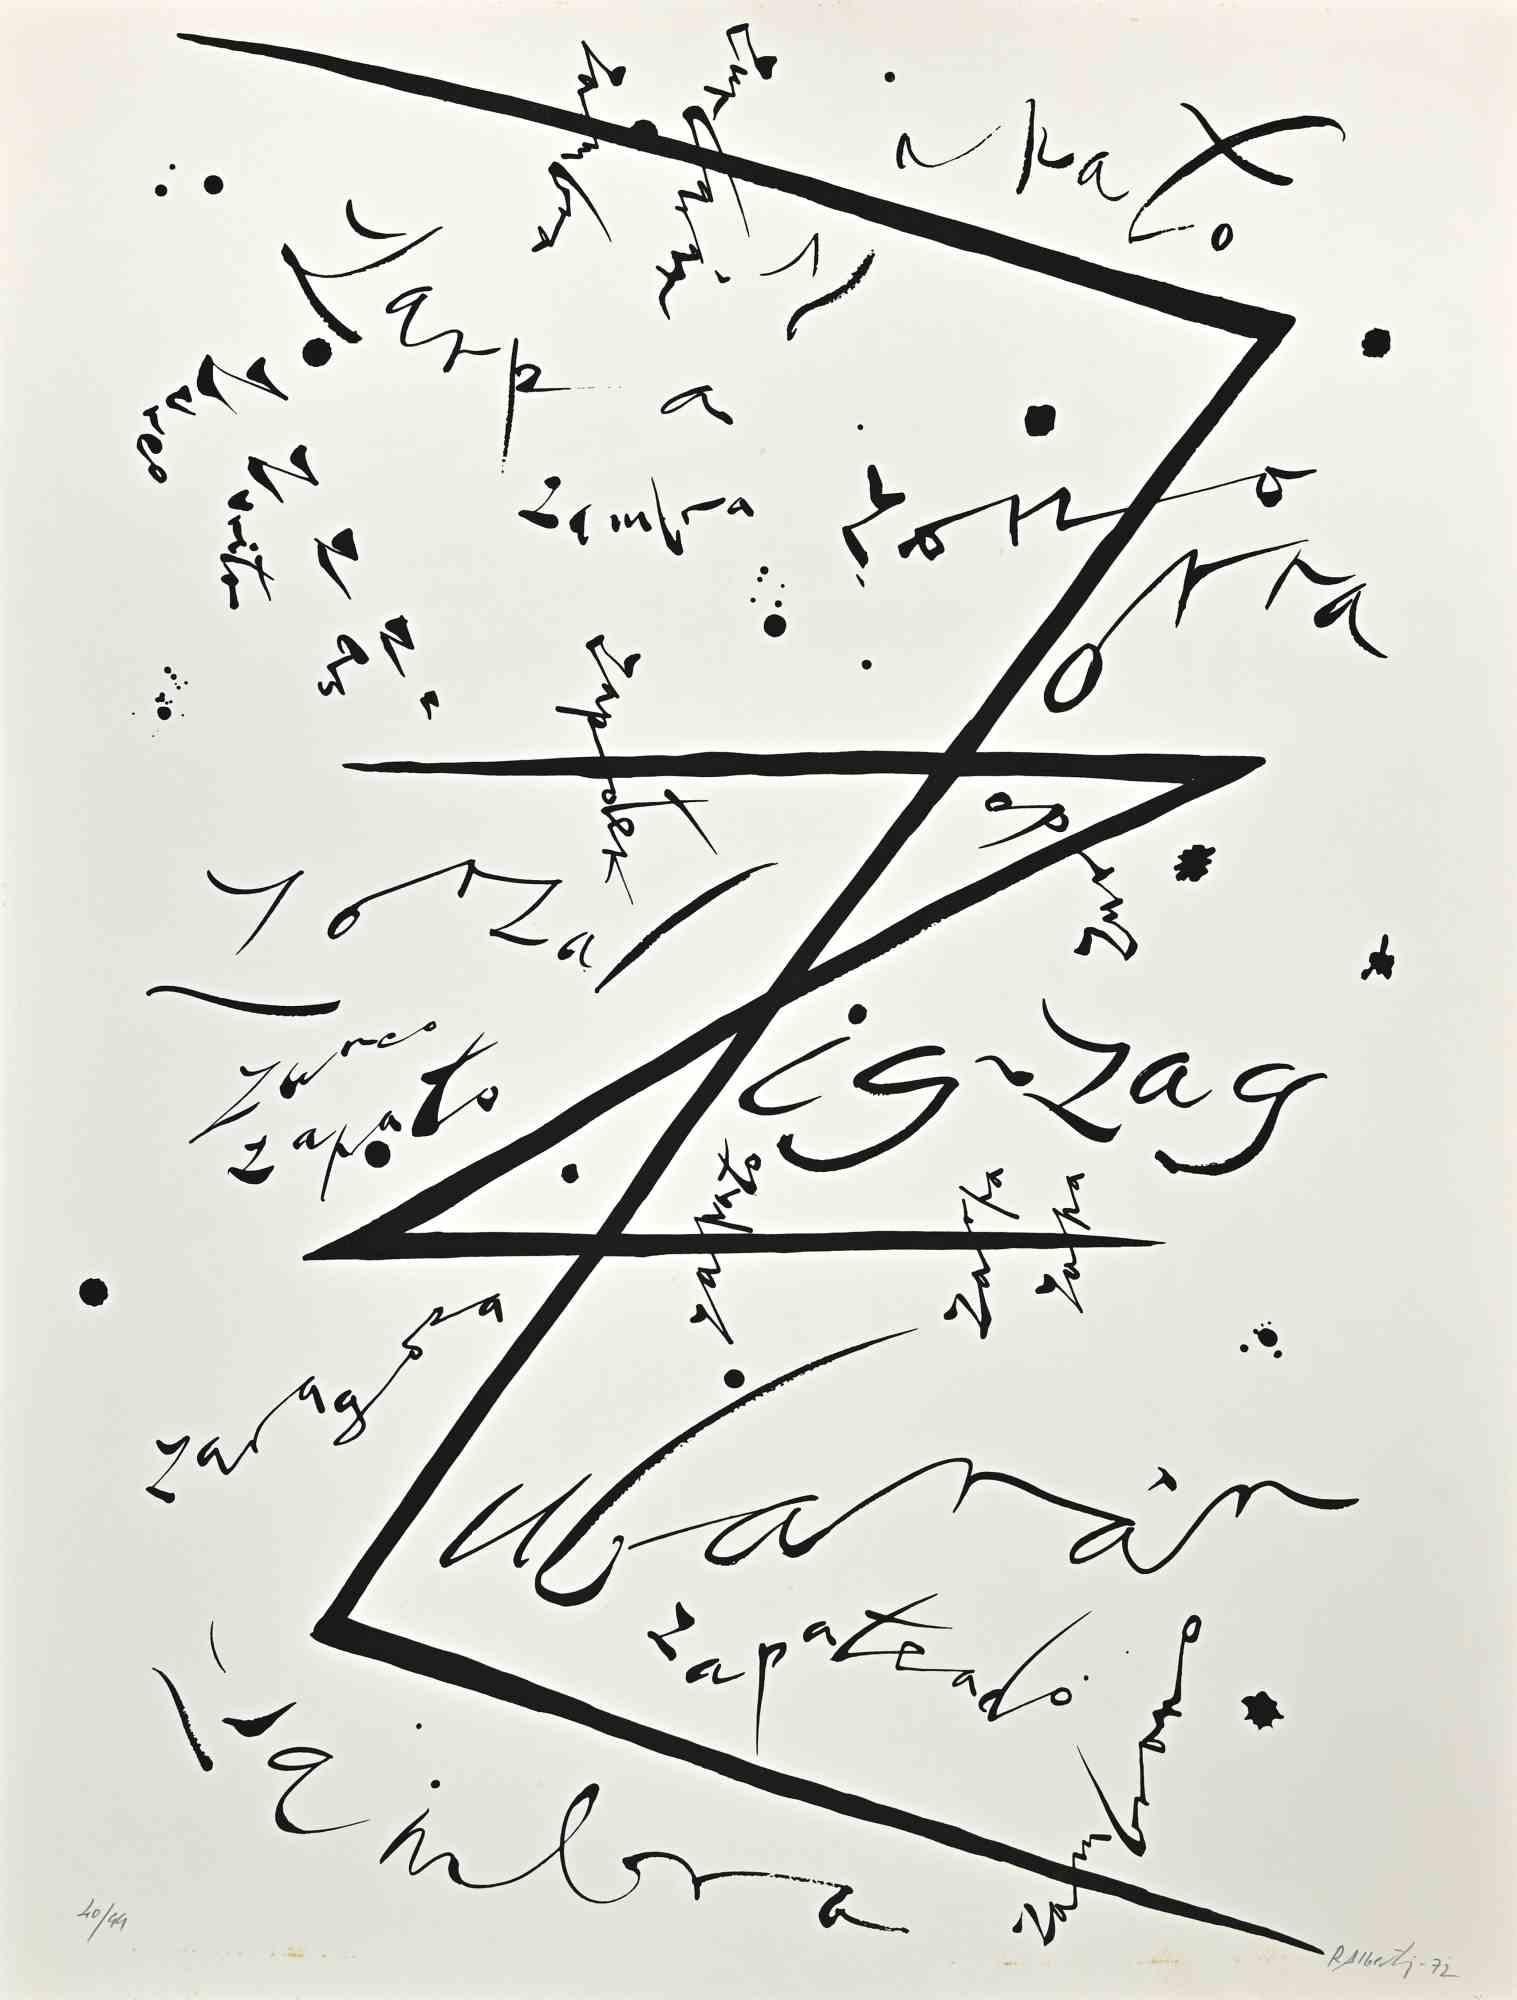 Letter Z   from Alphabet series is an original lithograph realized by Rafael Alberti in 1972.

Hand-signed and dated on the lower margin.

Numbered on the lower margin. Edition 40/44

Good conditions except for some stains

The artwork represents